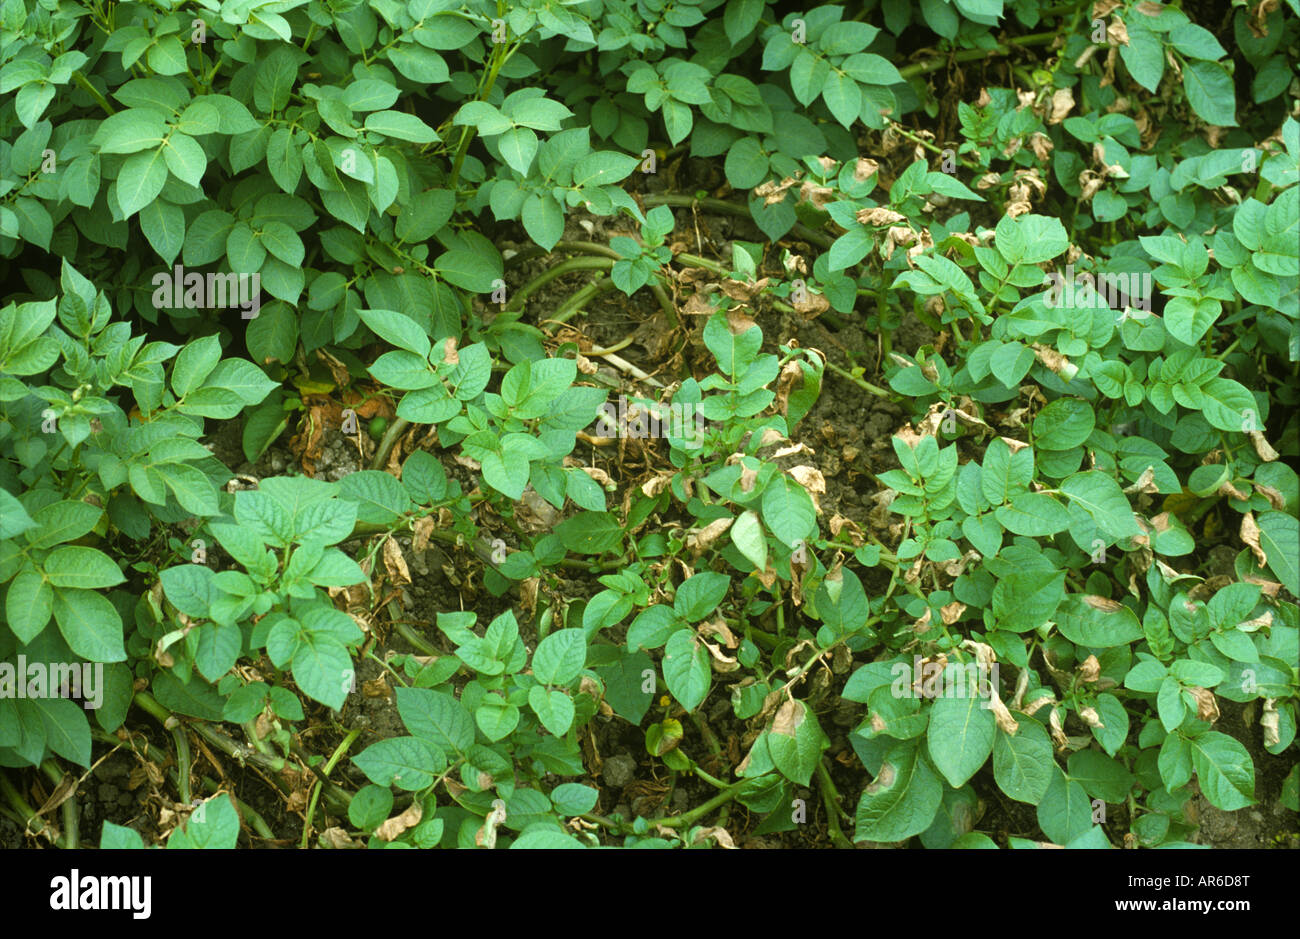 Potato late blight Phytophthora infestans infection in potato crop Stock Photo